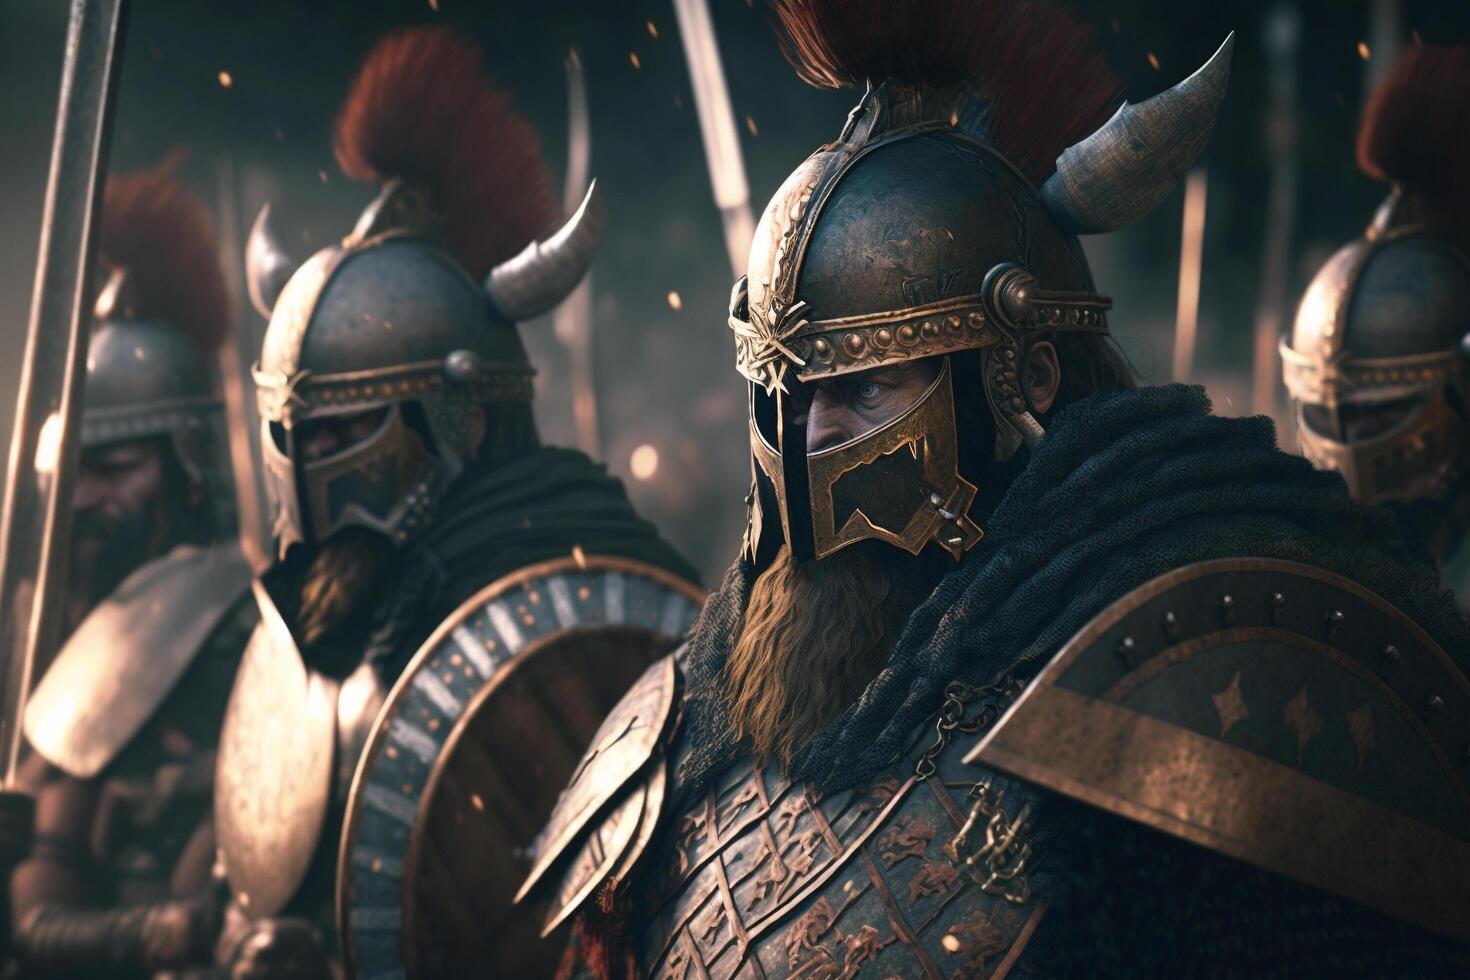 A group of men in armor standing next to each other, photo